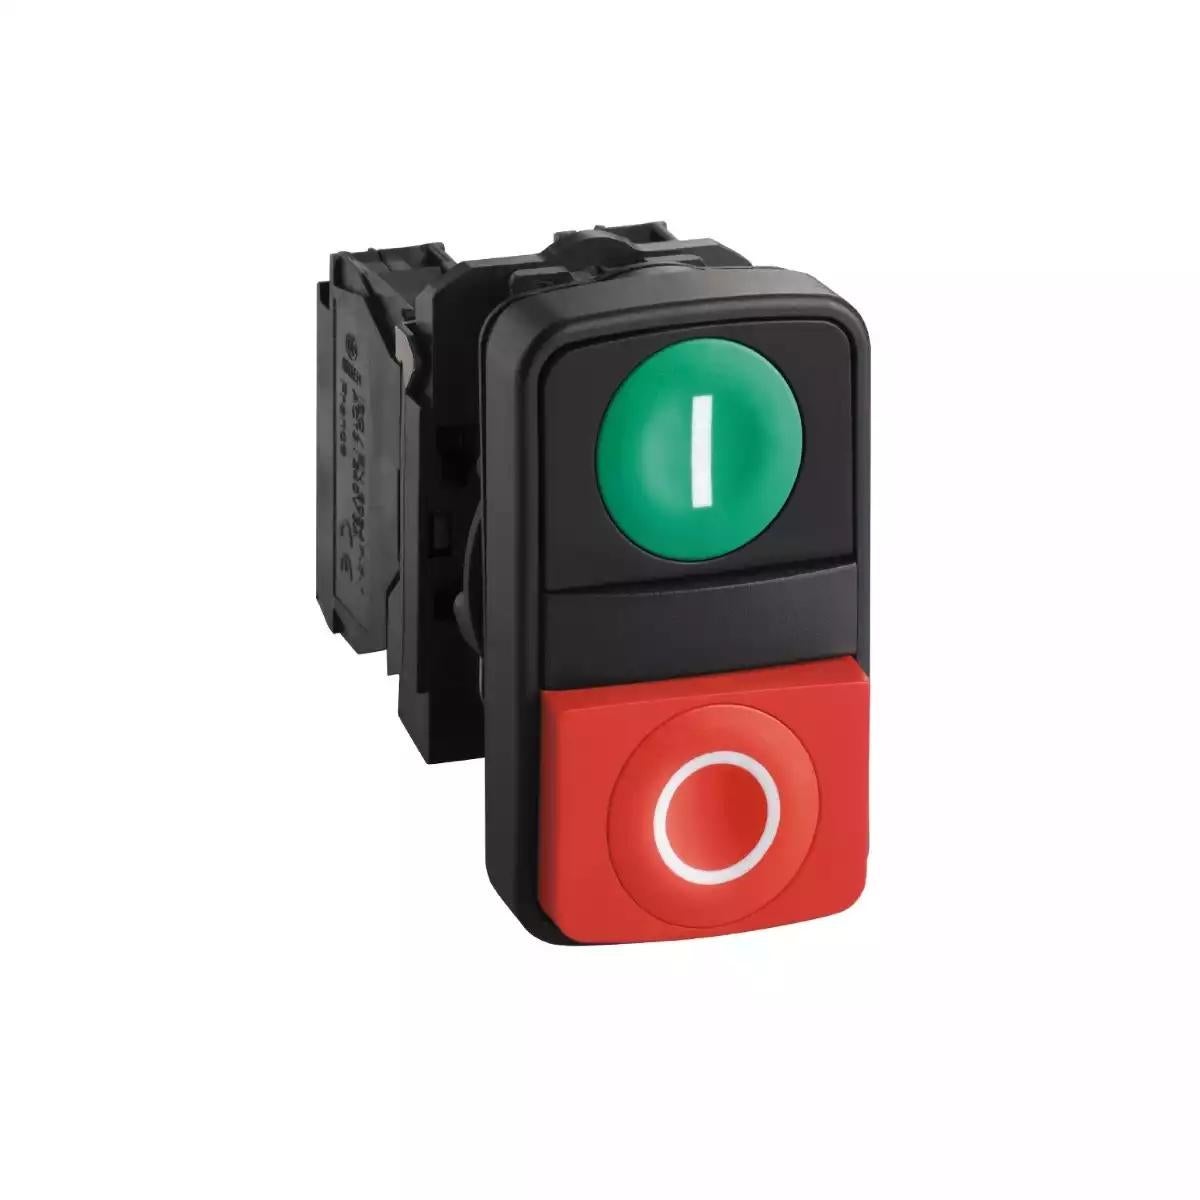 Schneider Electric Harmony XB5 green flush/red projecting double-headed pushbutton Ã˜22 with marking